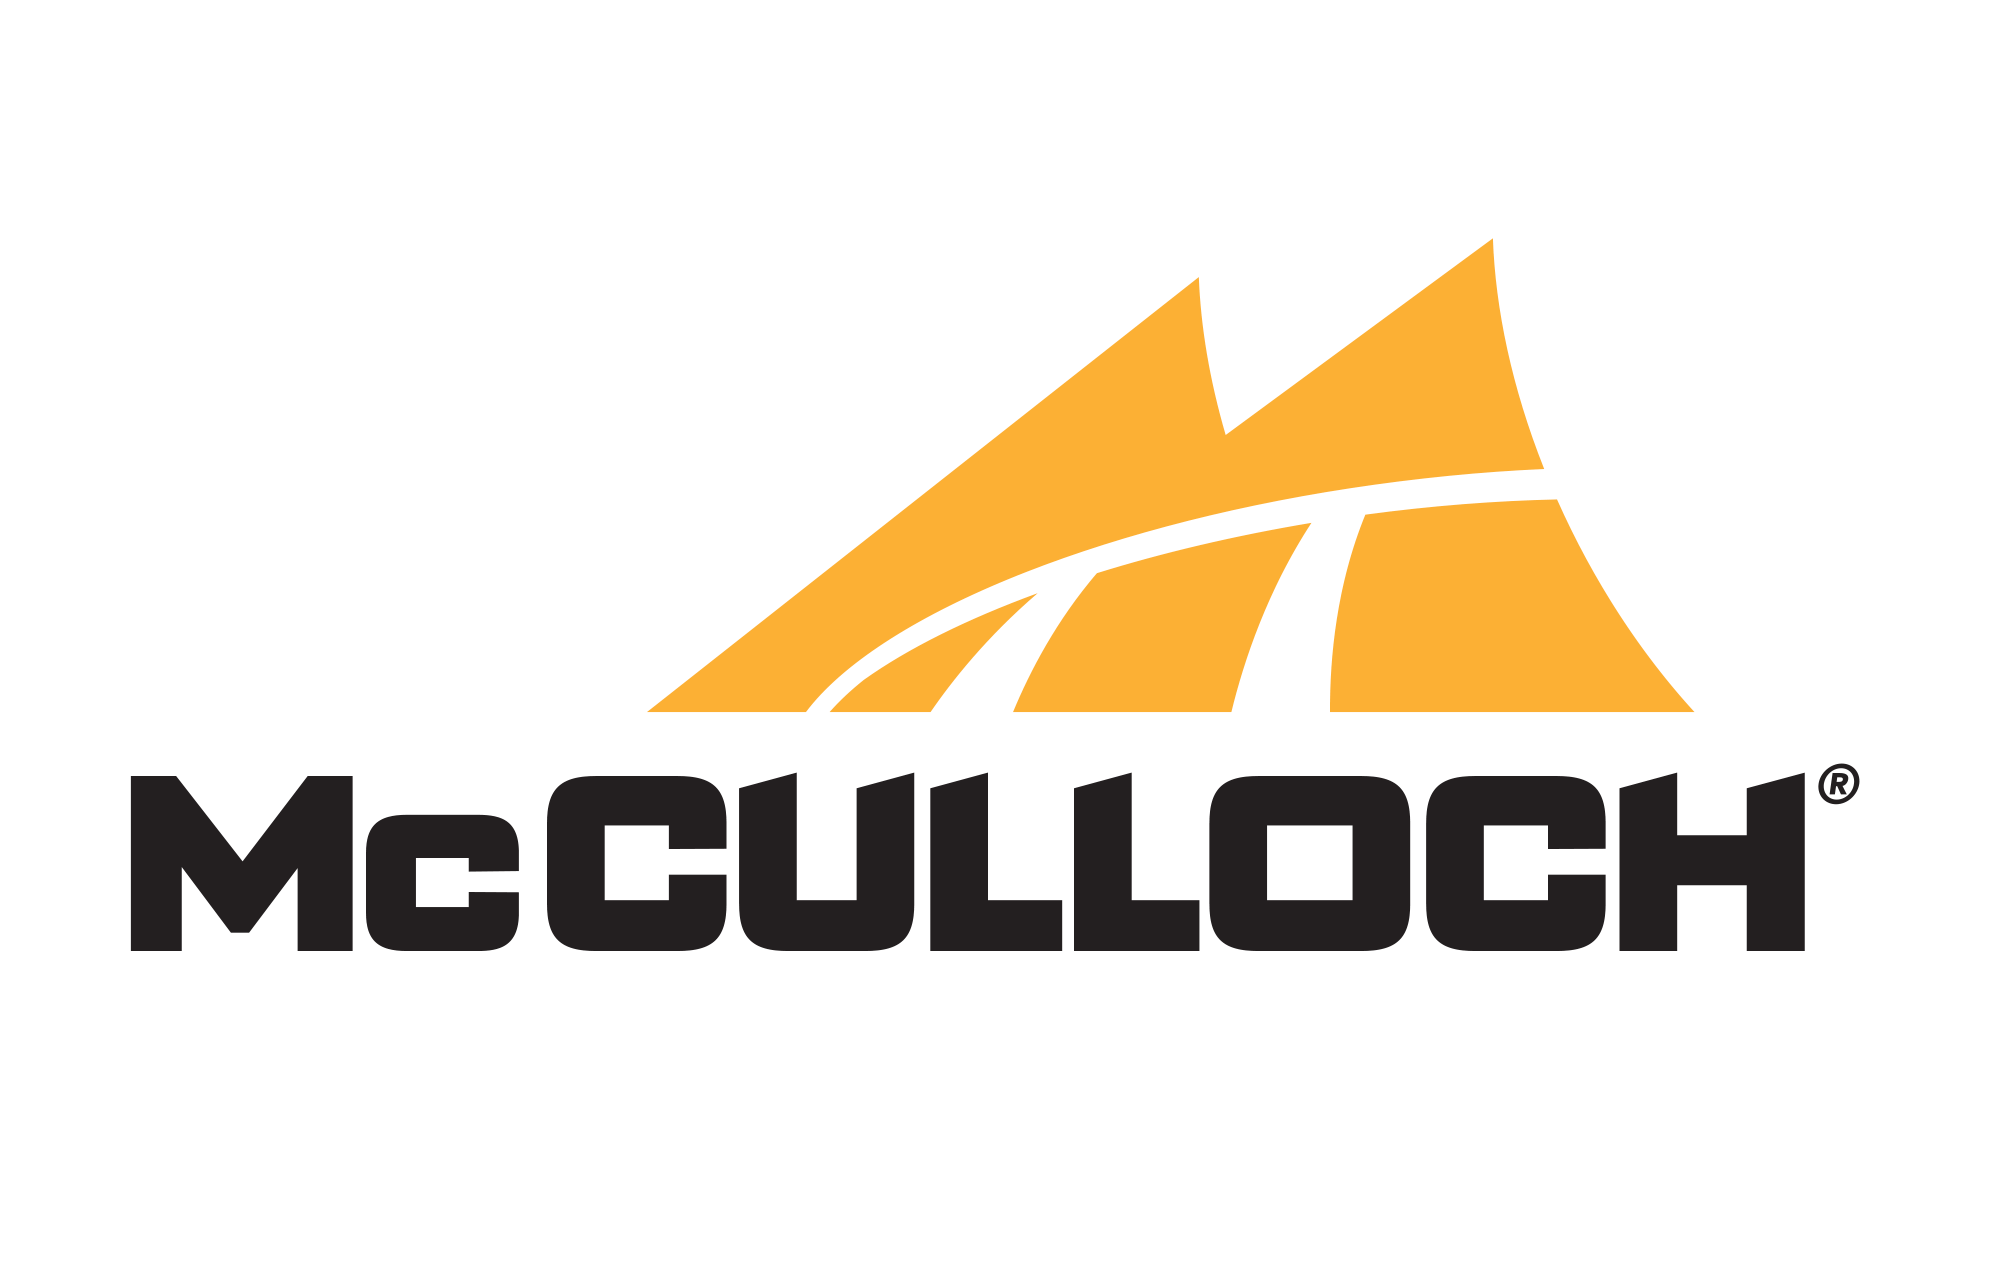 McCullough Logo - 25% Off McCulloch Promo Codes | Top 2019 Coupons @PromoCodeWatch